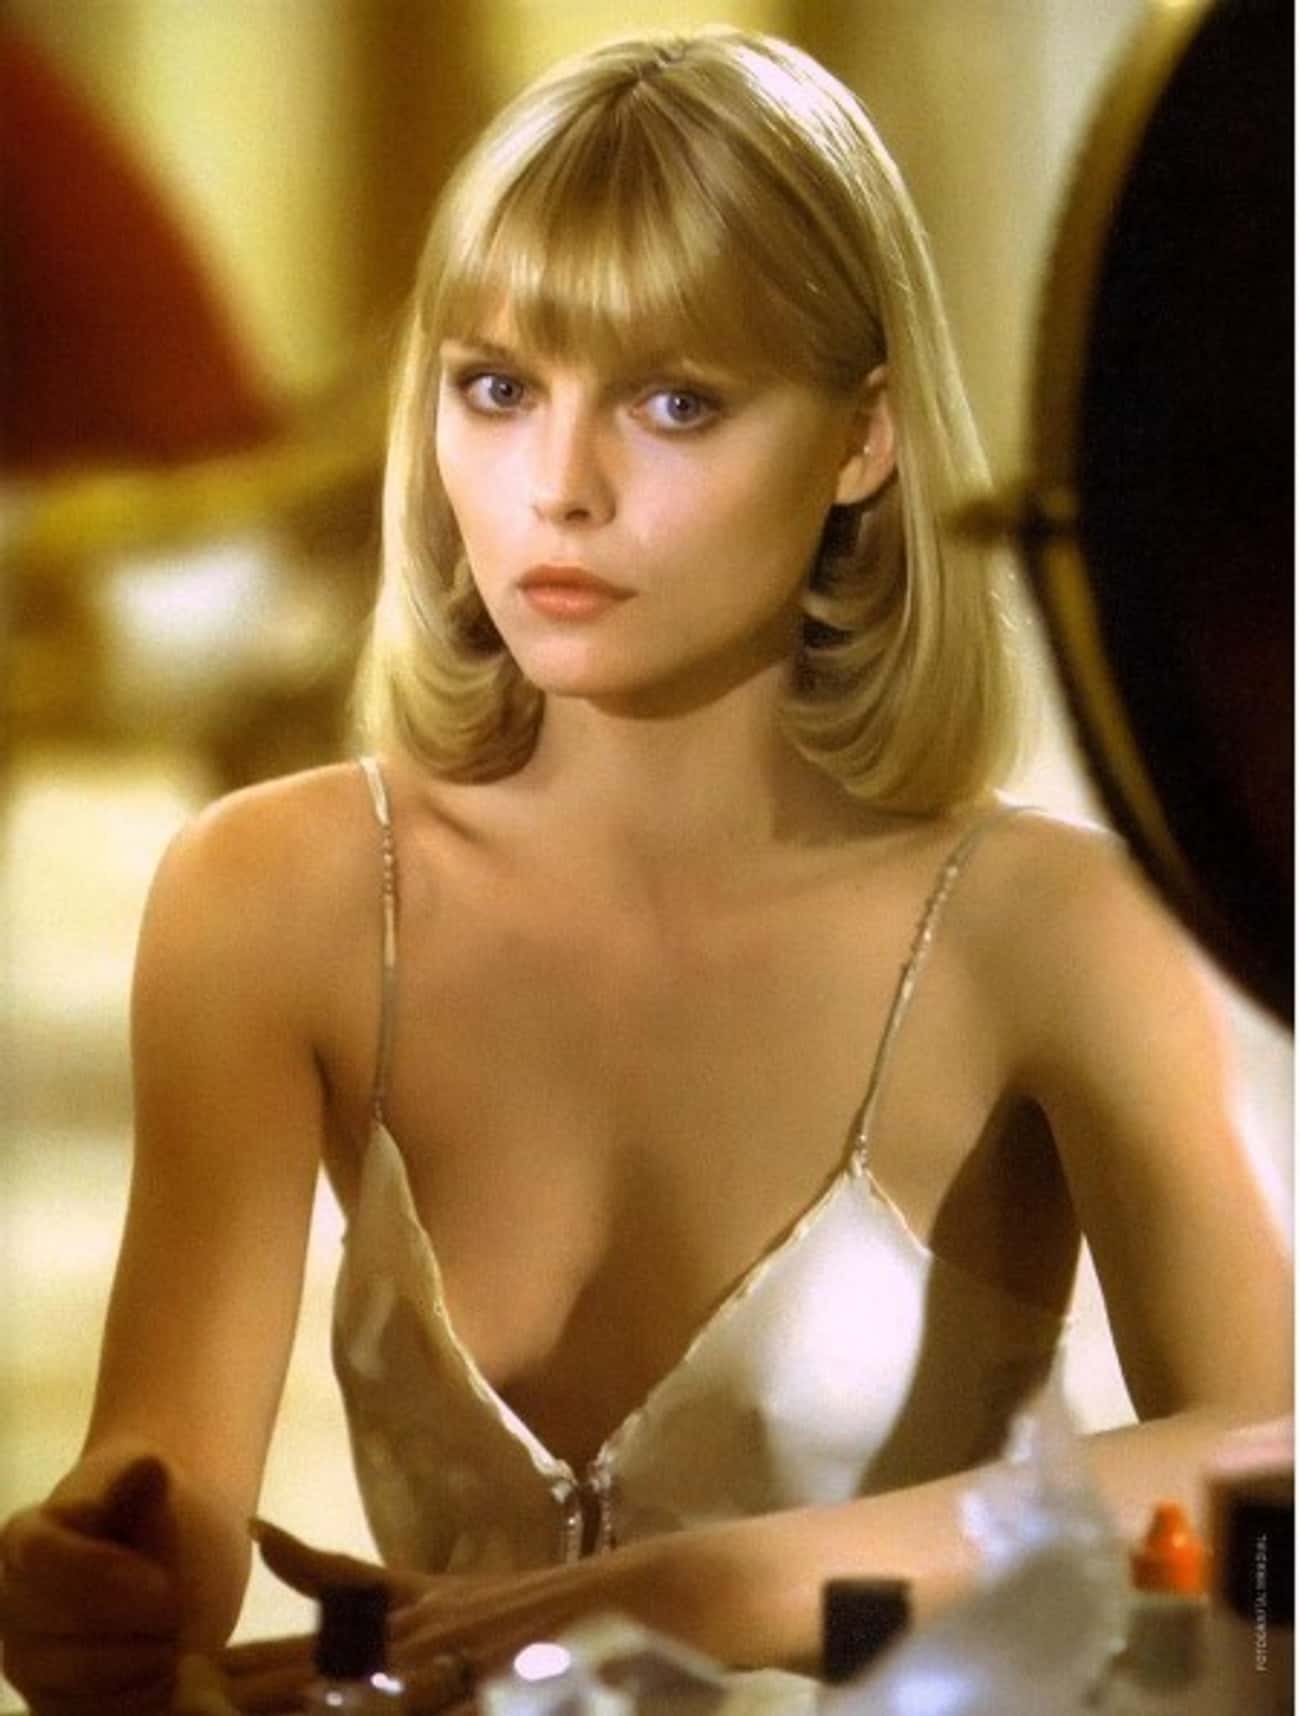 Young Michelle Pfeiffer in a Lowcut Spaghetti Strap Blouse